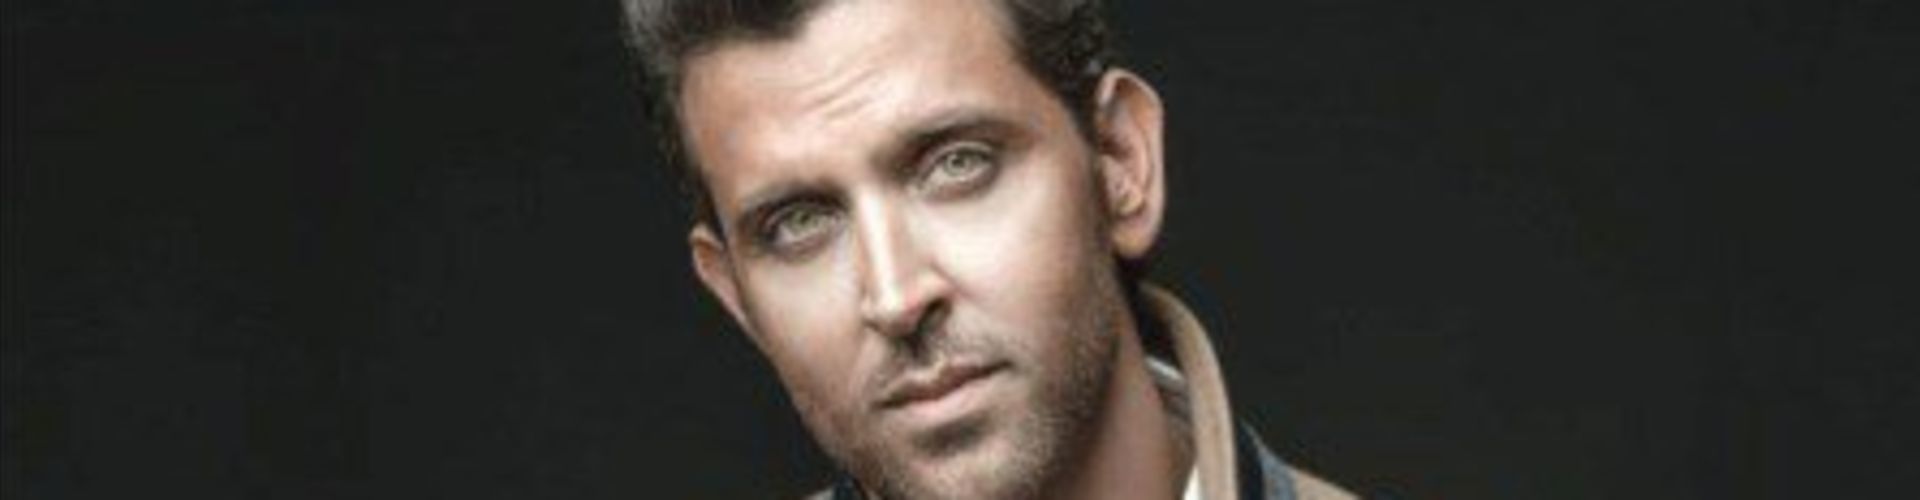 Doesn’t Wish to Make a Spectacle - Hrithik Roshan